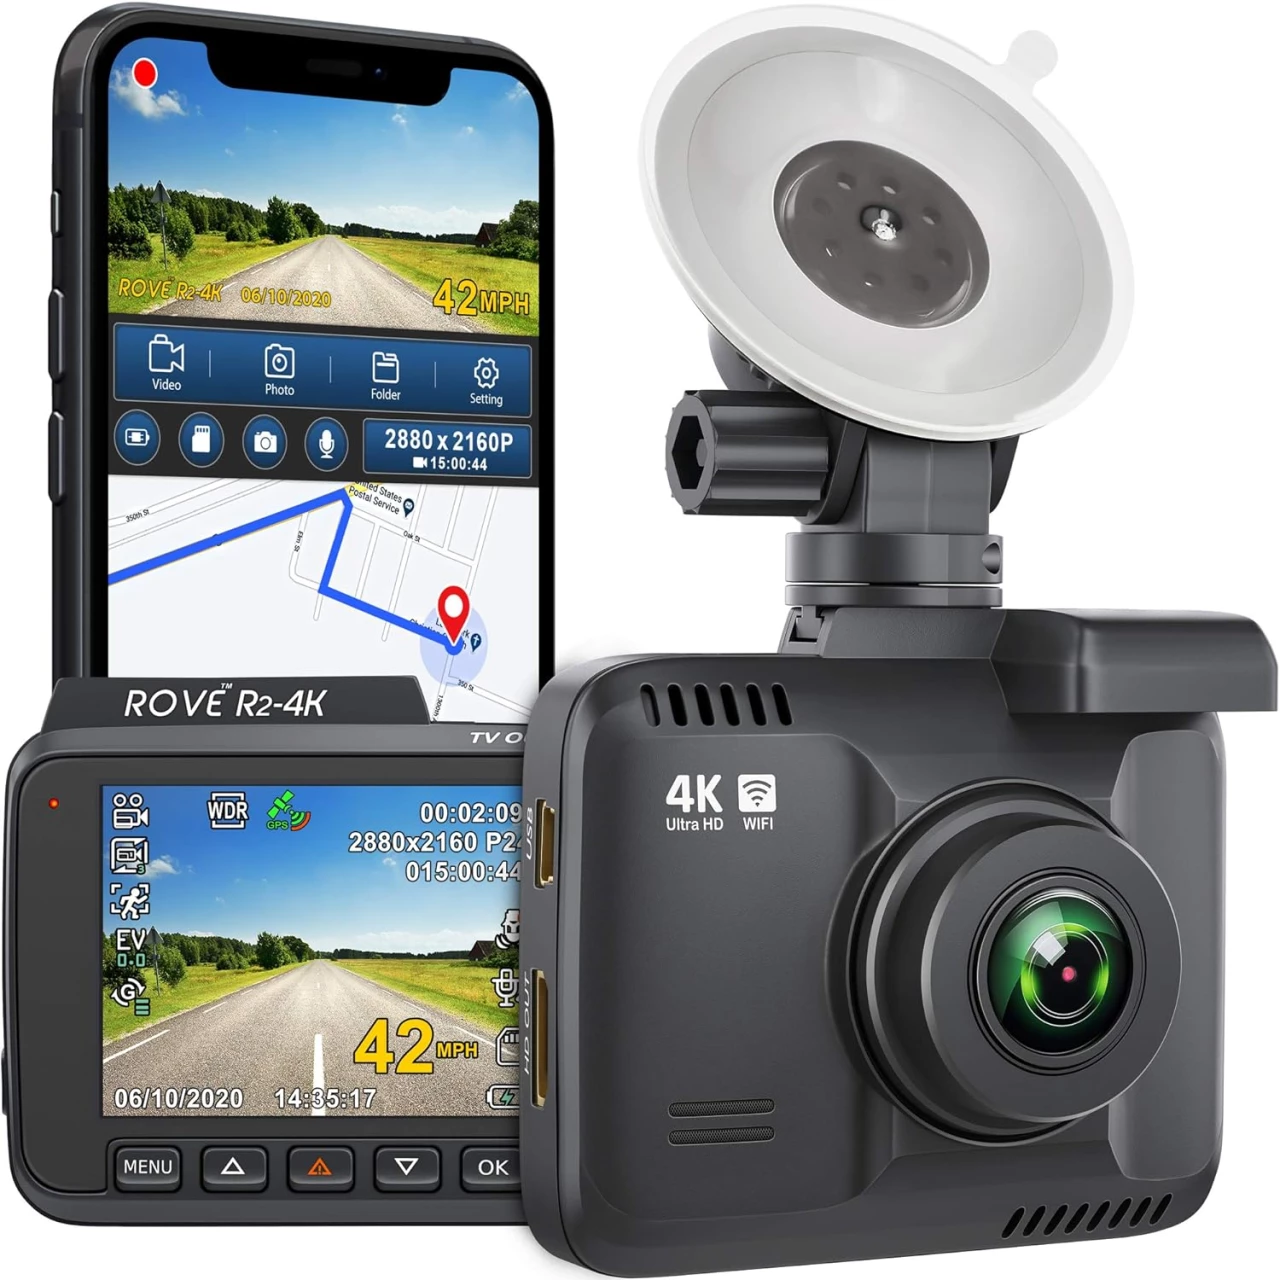 Rove R2-4K Dash Cam Built in WiFi GPS Car top Dashboard Camera Recorder with UHD 2160P, 2.4&quot; LCD, 150° Wide Angle, WDR, Night Vision